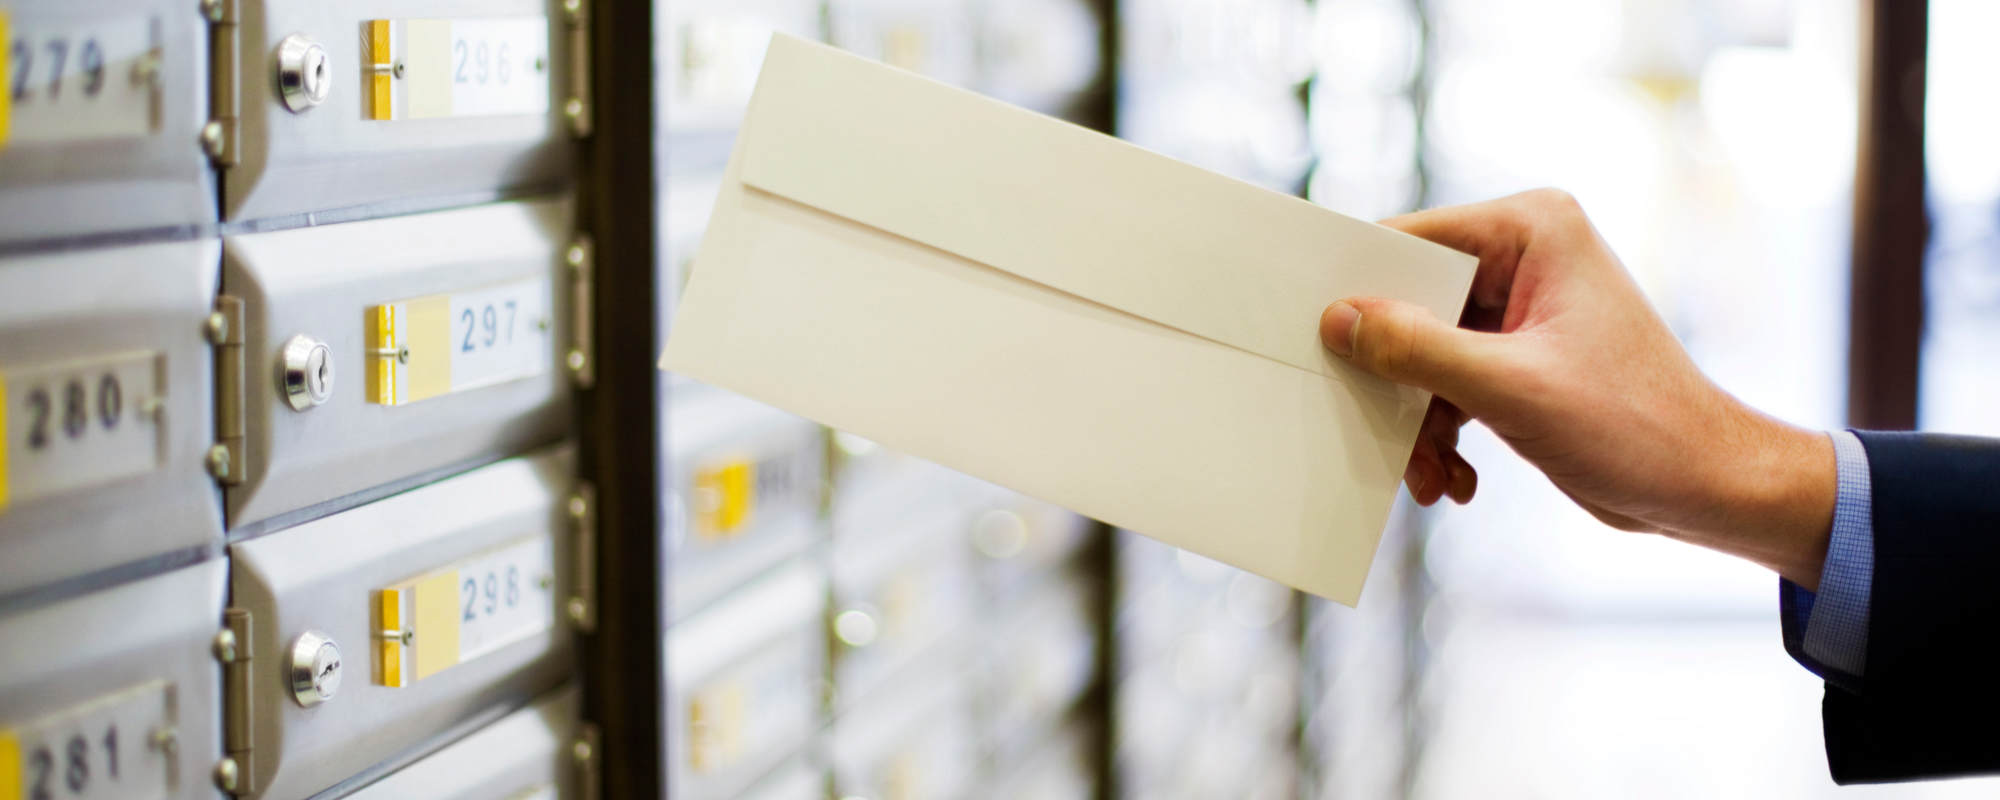 Sending or receiving mail, a hand holding a letter in front of mailboxes. Mailing lists related stock photo.